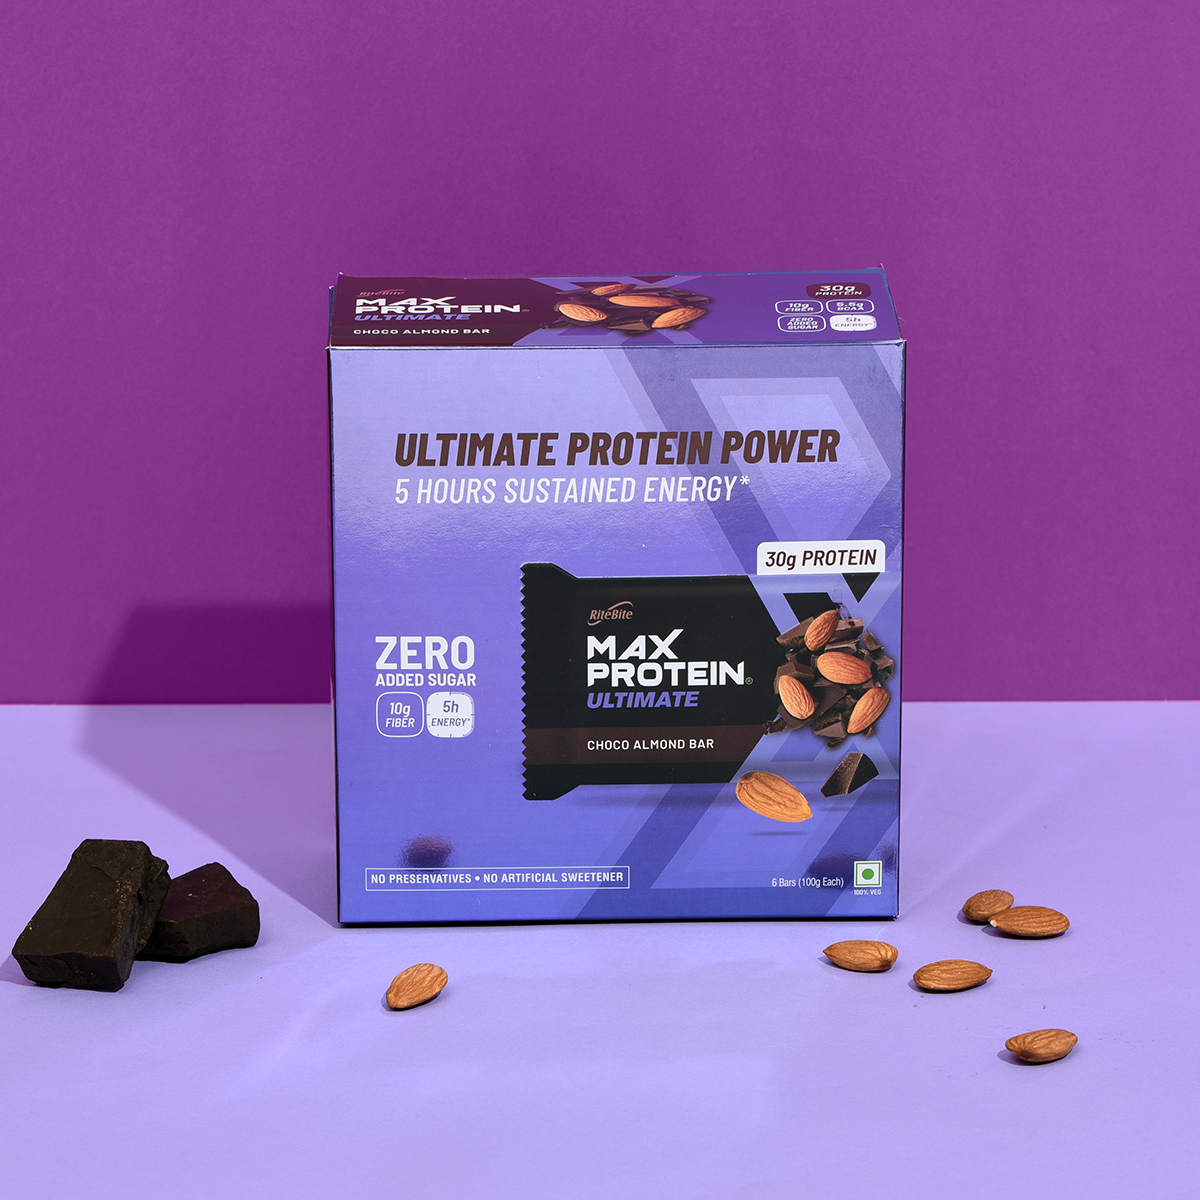 Max Protein Ultimate Choco Almond